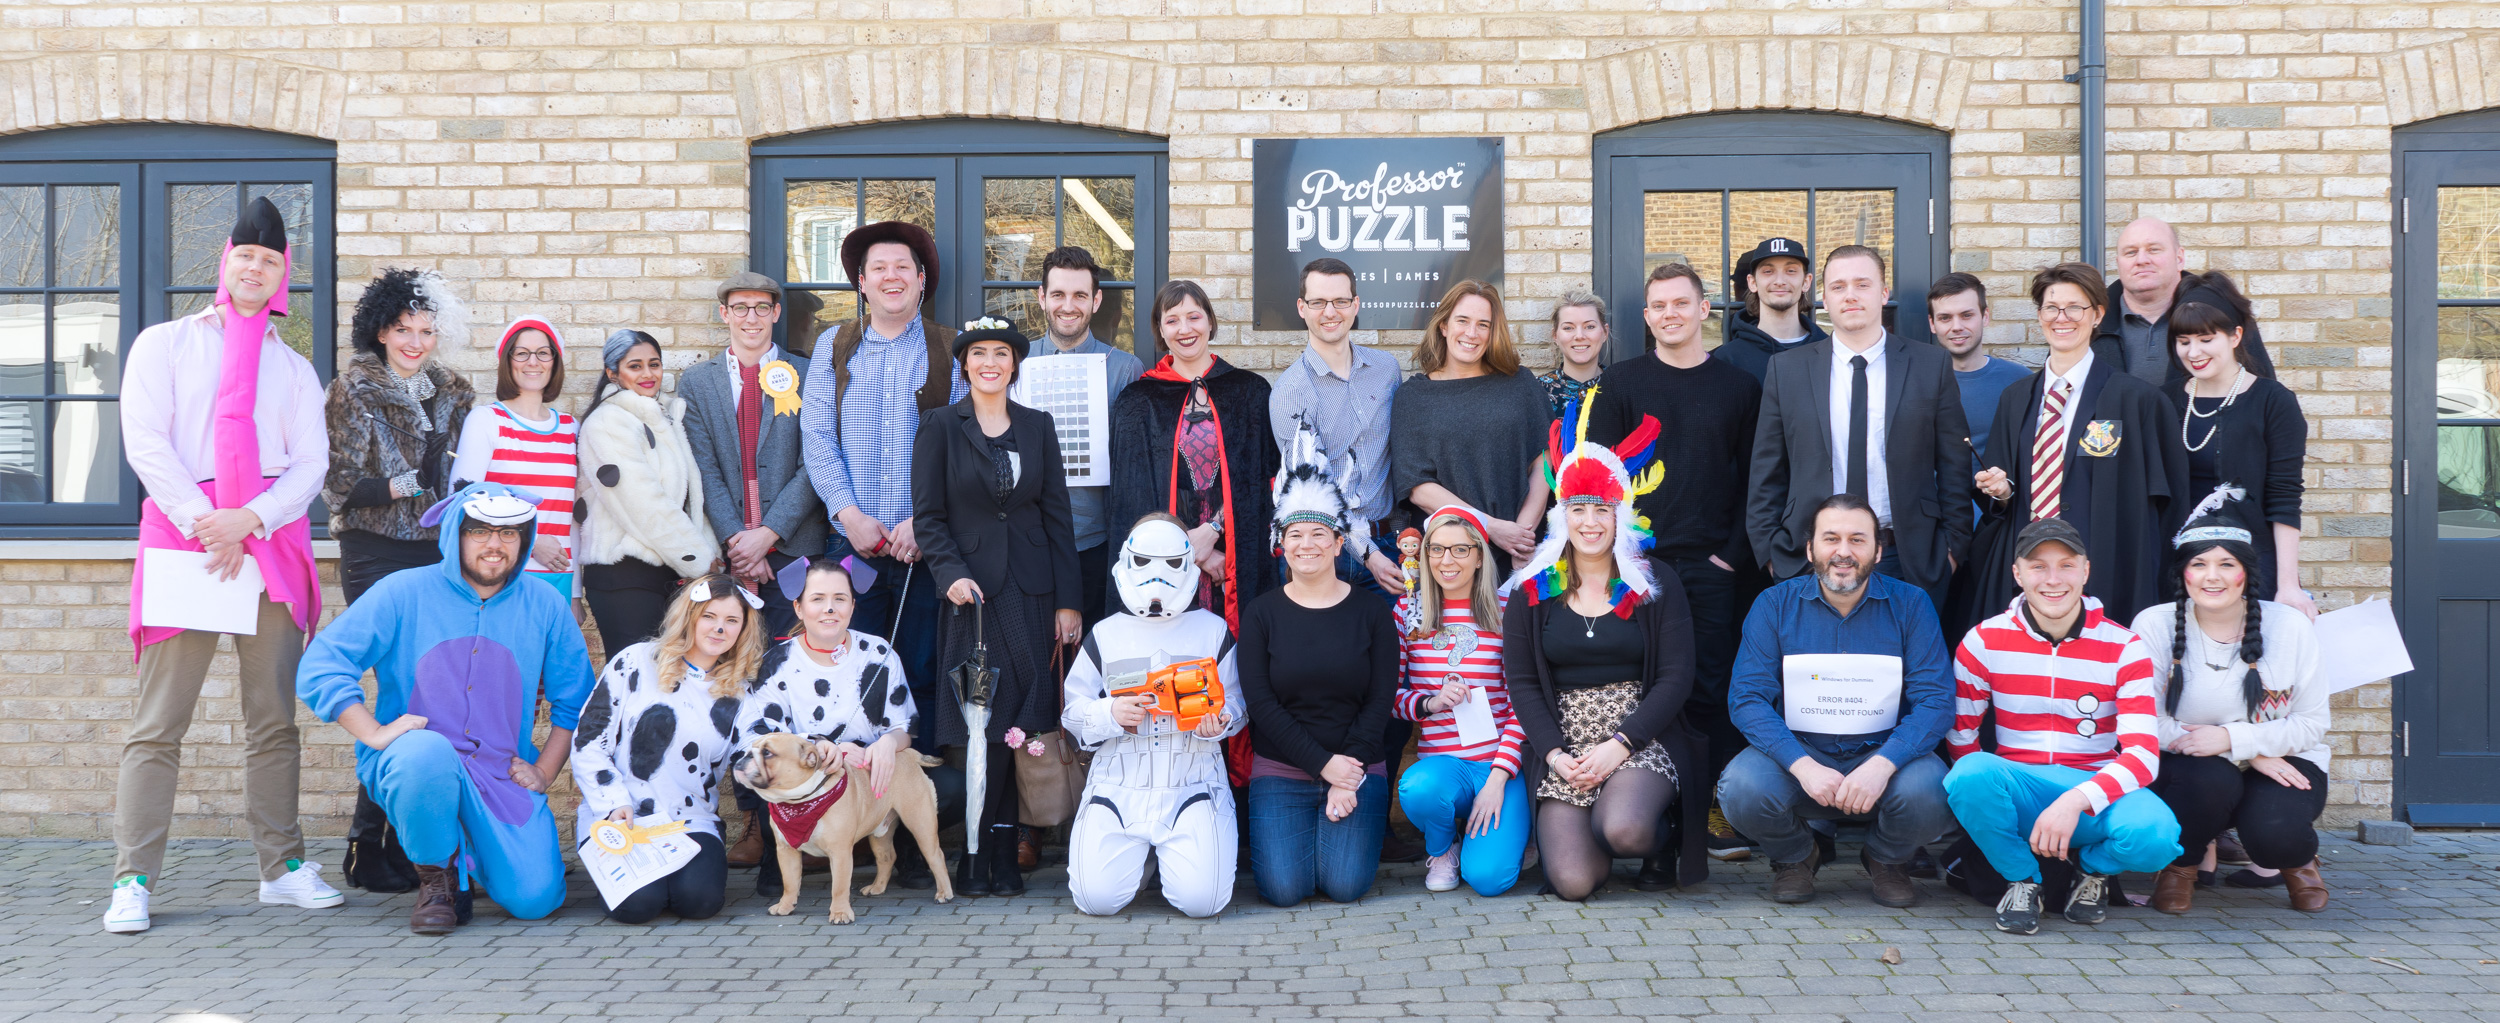 World Book Day at The Puzzle Academy